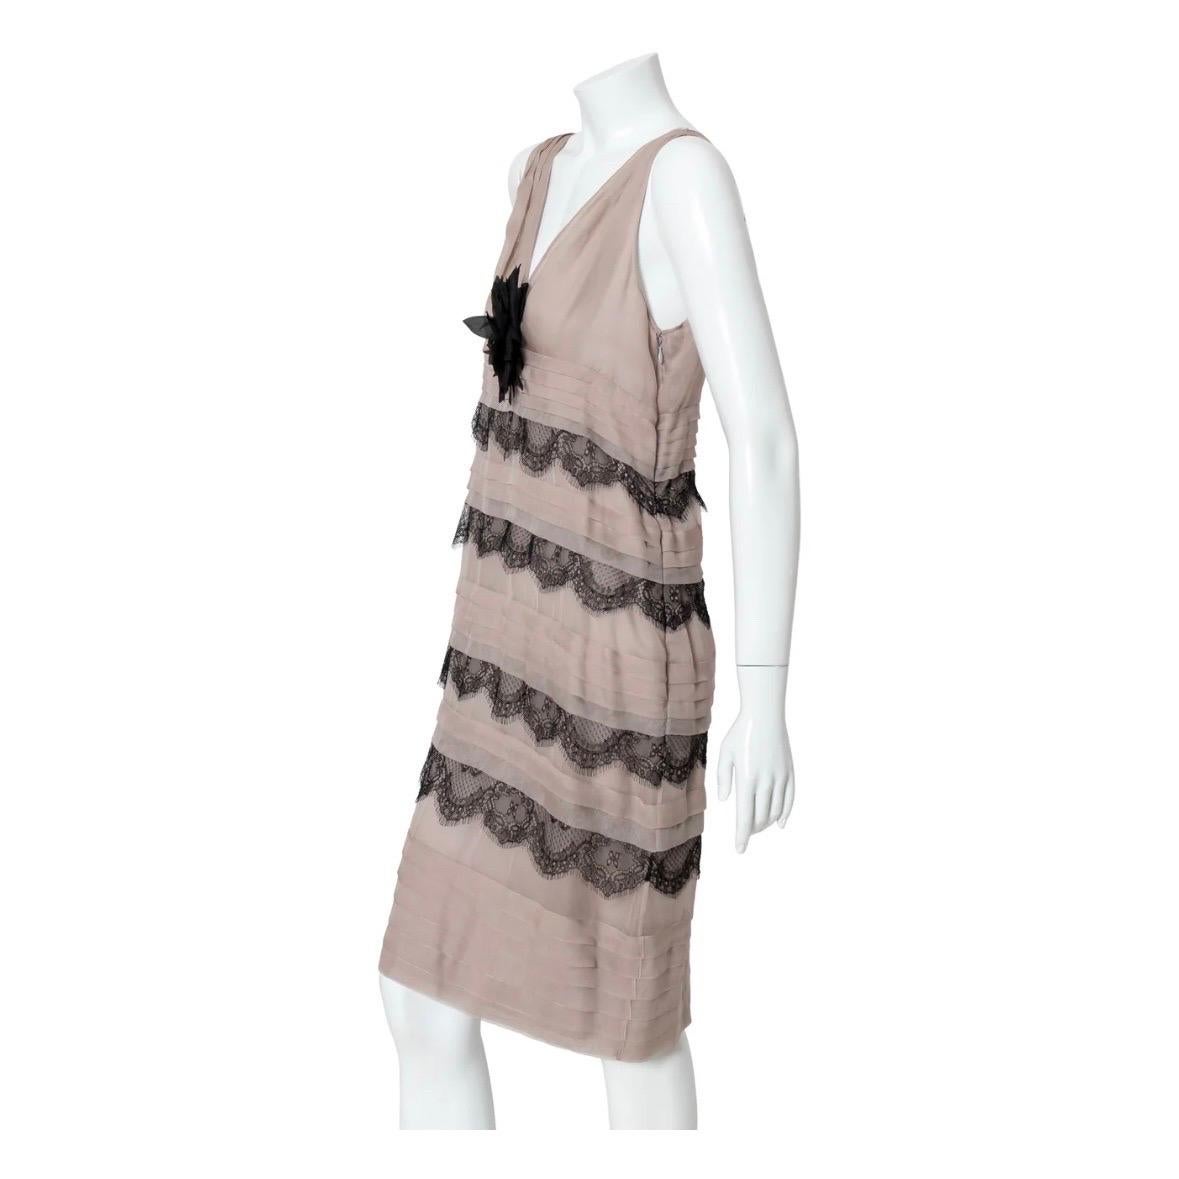 Lace chiffon sheath dress by Valentino
2008 Collection
Sleeveless
Deep v-neckline
Feather floral detail
Horizontal pleating
Tiered black lace
Semi-sheer
Above knee-length
Sheath silhouette
Dusty purple/lilac
Side zipper closure
Unlined
Made in